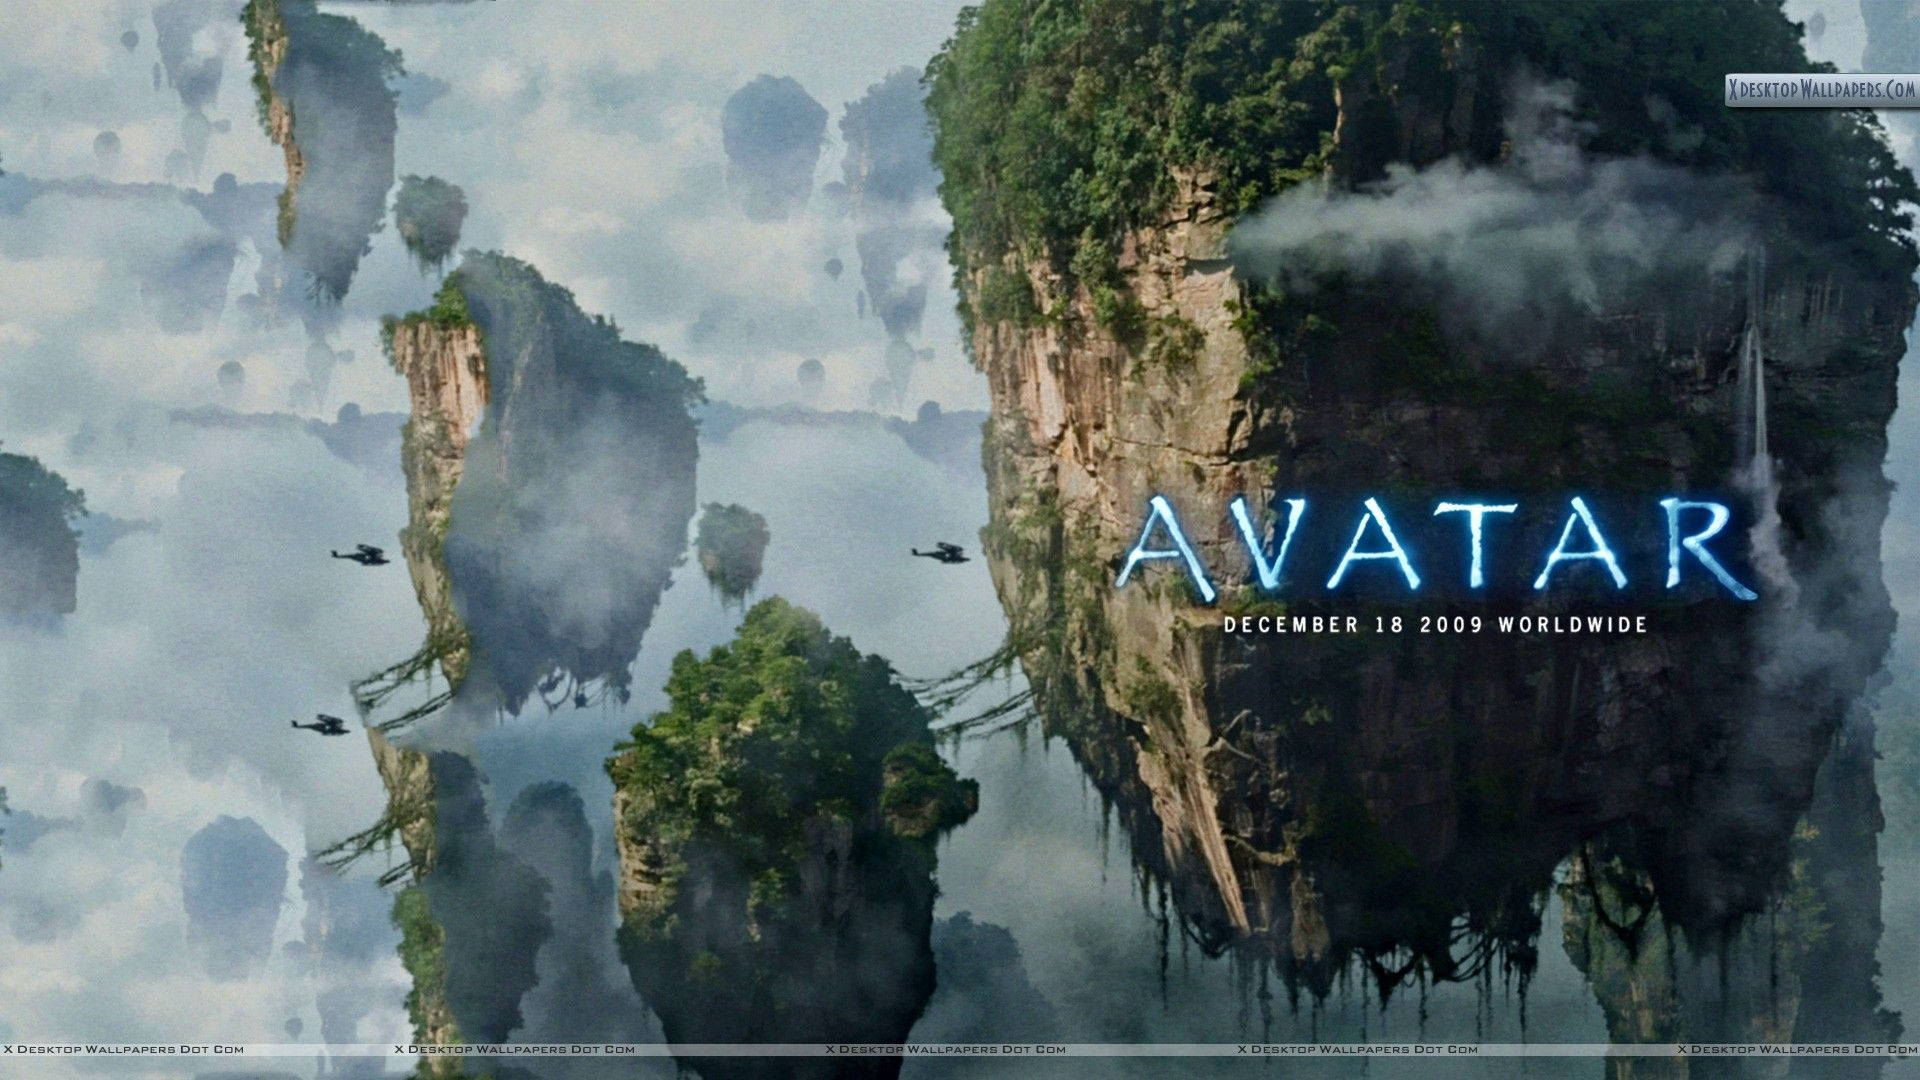 Avatar Movie Poster With Floating Island Background